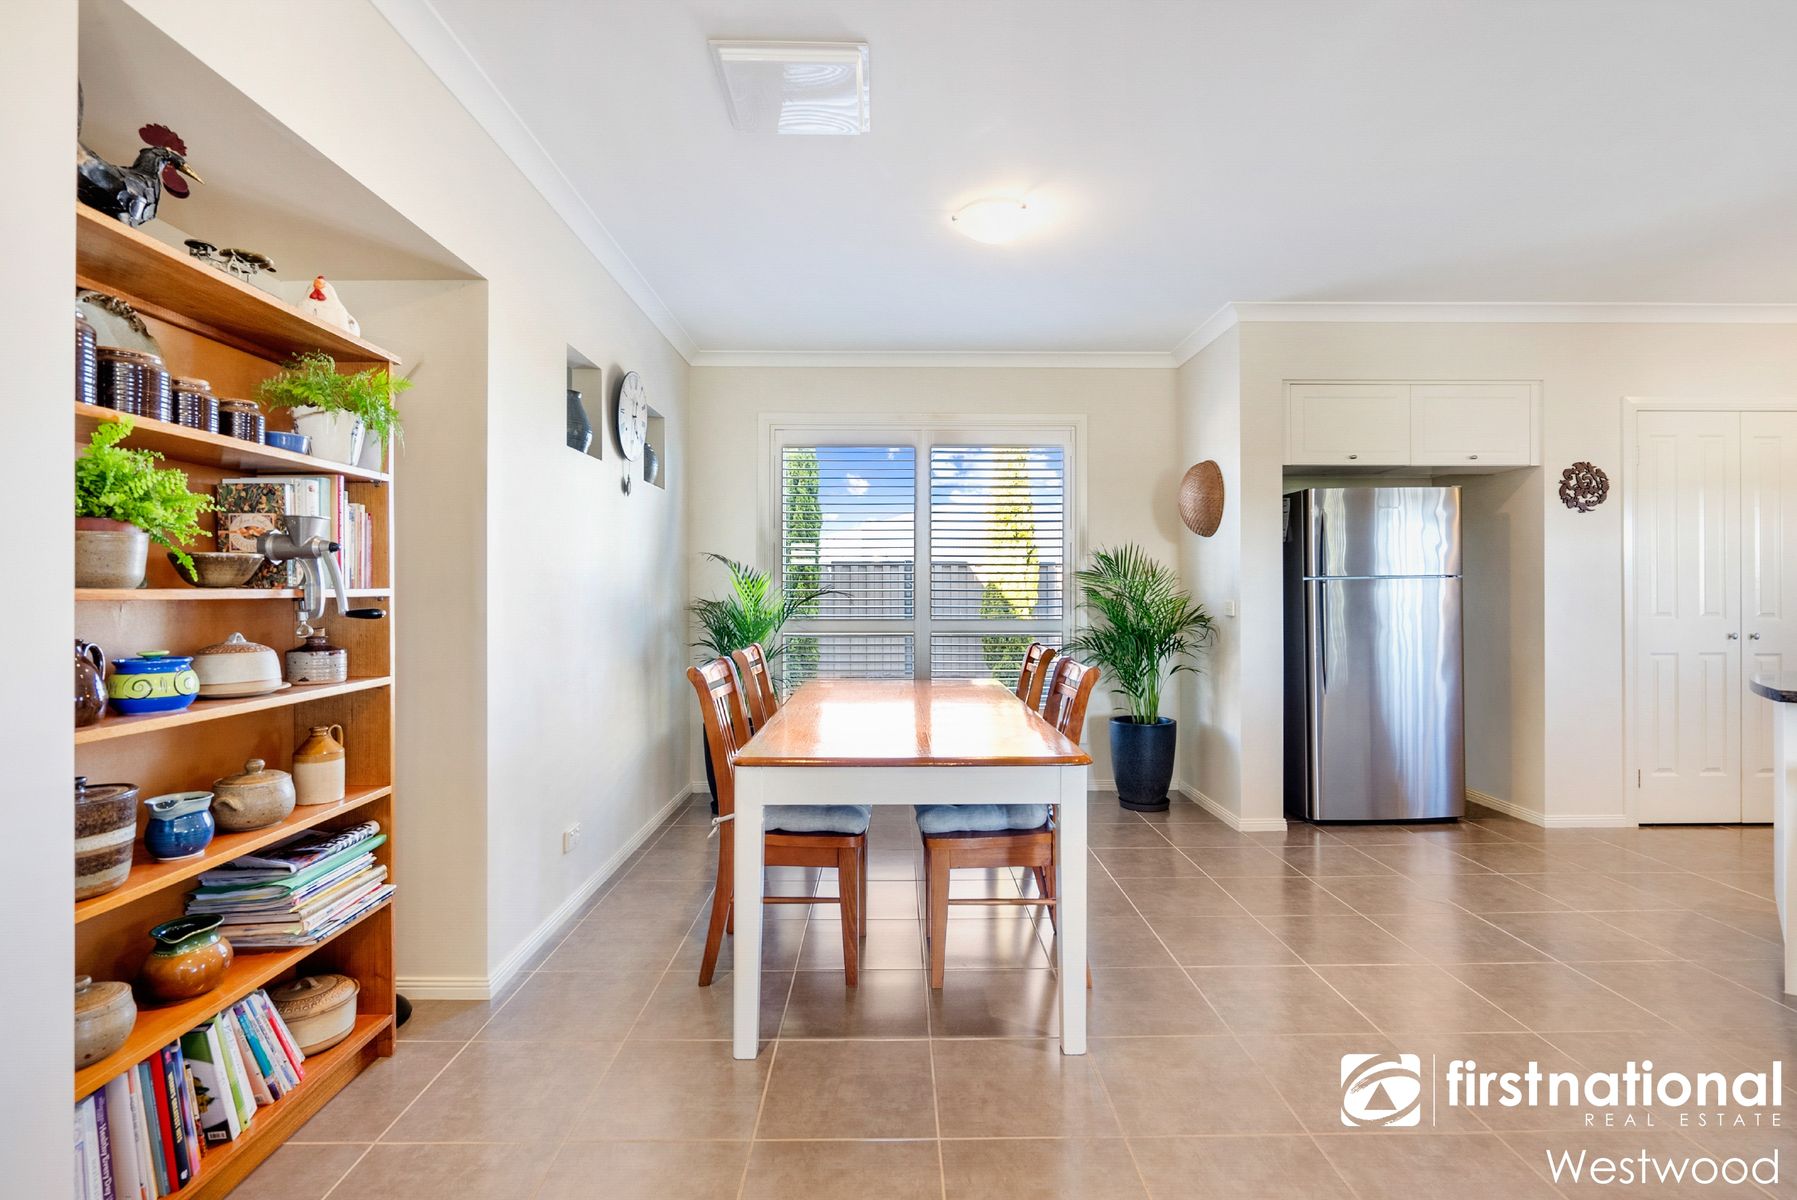 73 Cuttriss Road, Werribee South, VIC 3030